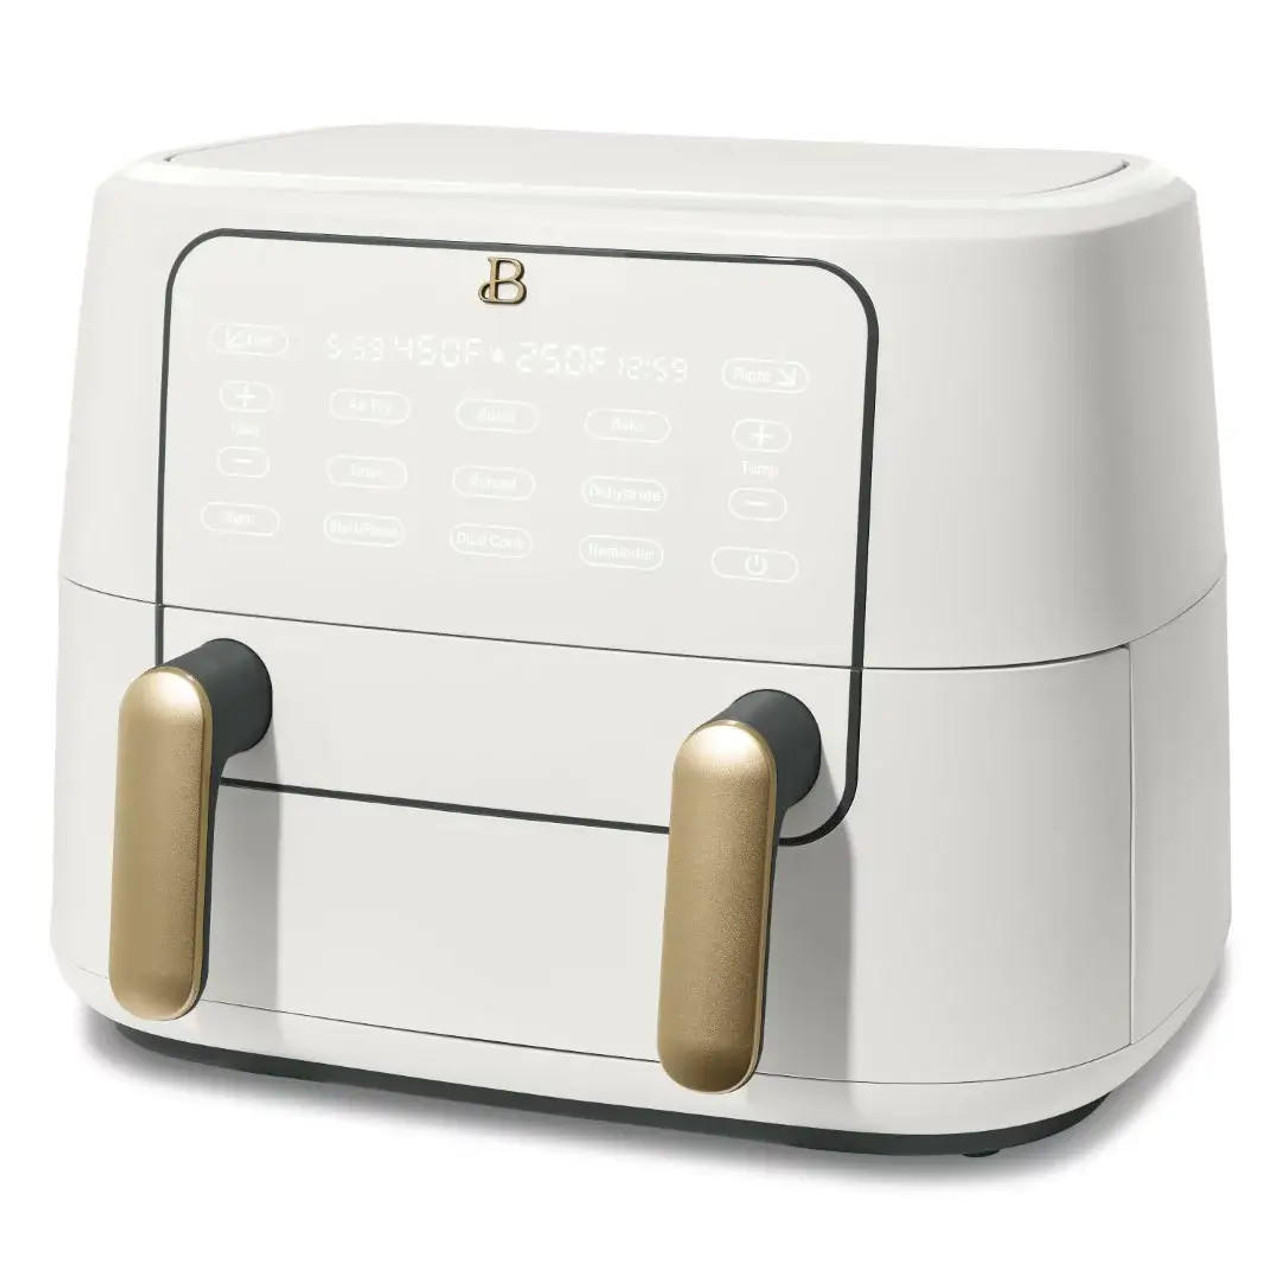 https://cdn11.bigcommerce.com/s-g5ygv2at8j/images/stencil/1280x1280/products/14017/28480/beautiful-9qt-trizone-air-fryer-by-drew-barrymore__87066.1688343901.jpg?c=1